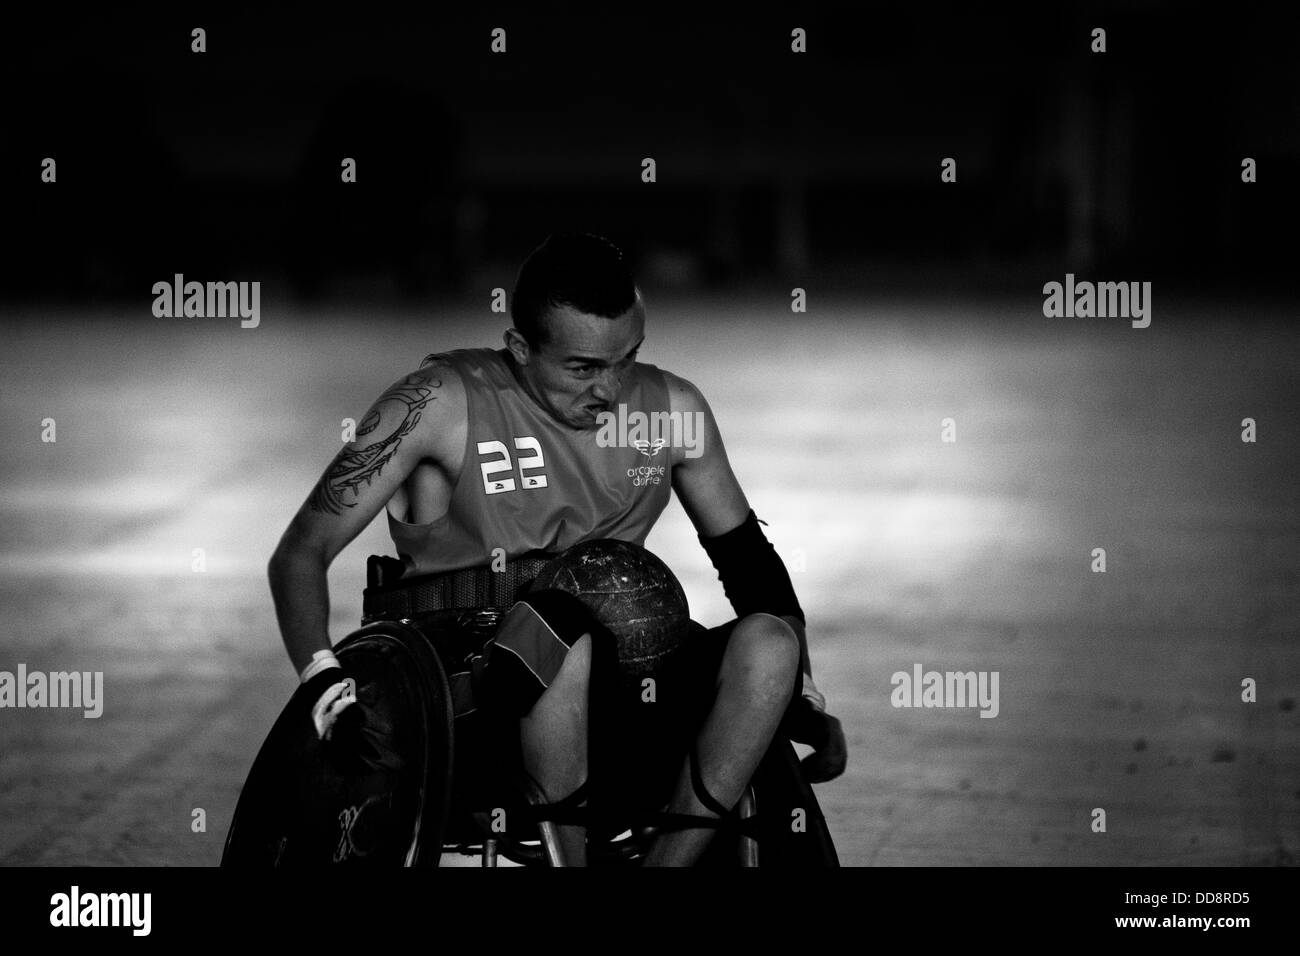 A Colombian disabled athlete, in action during a wheelchair rugby training match at the arena in Bogota, Colombia. Stock Photo